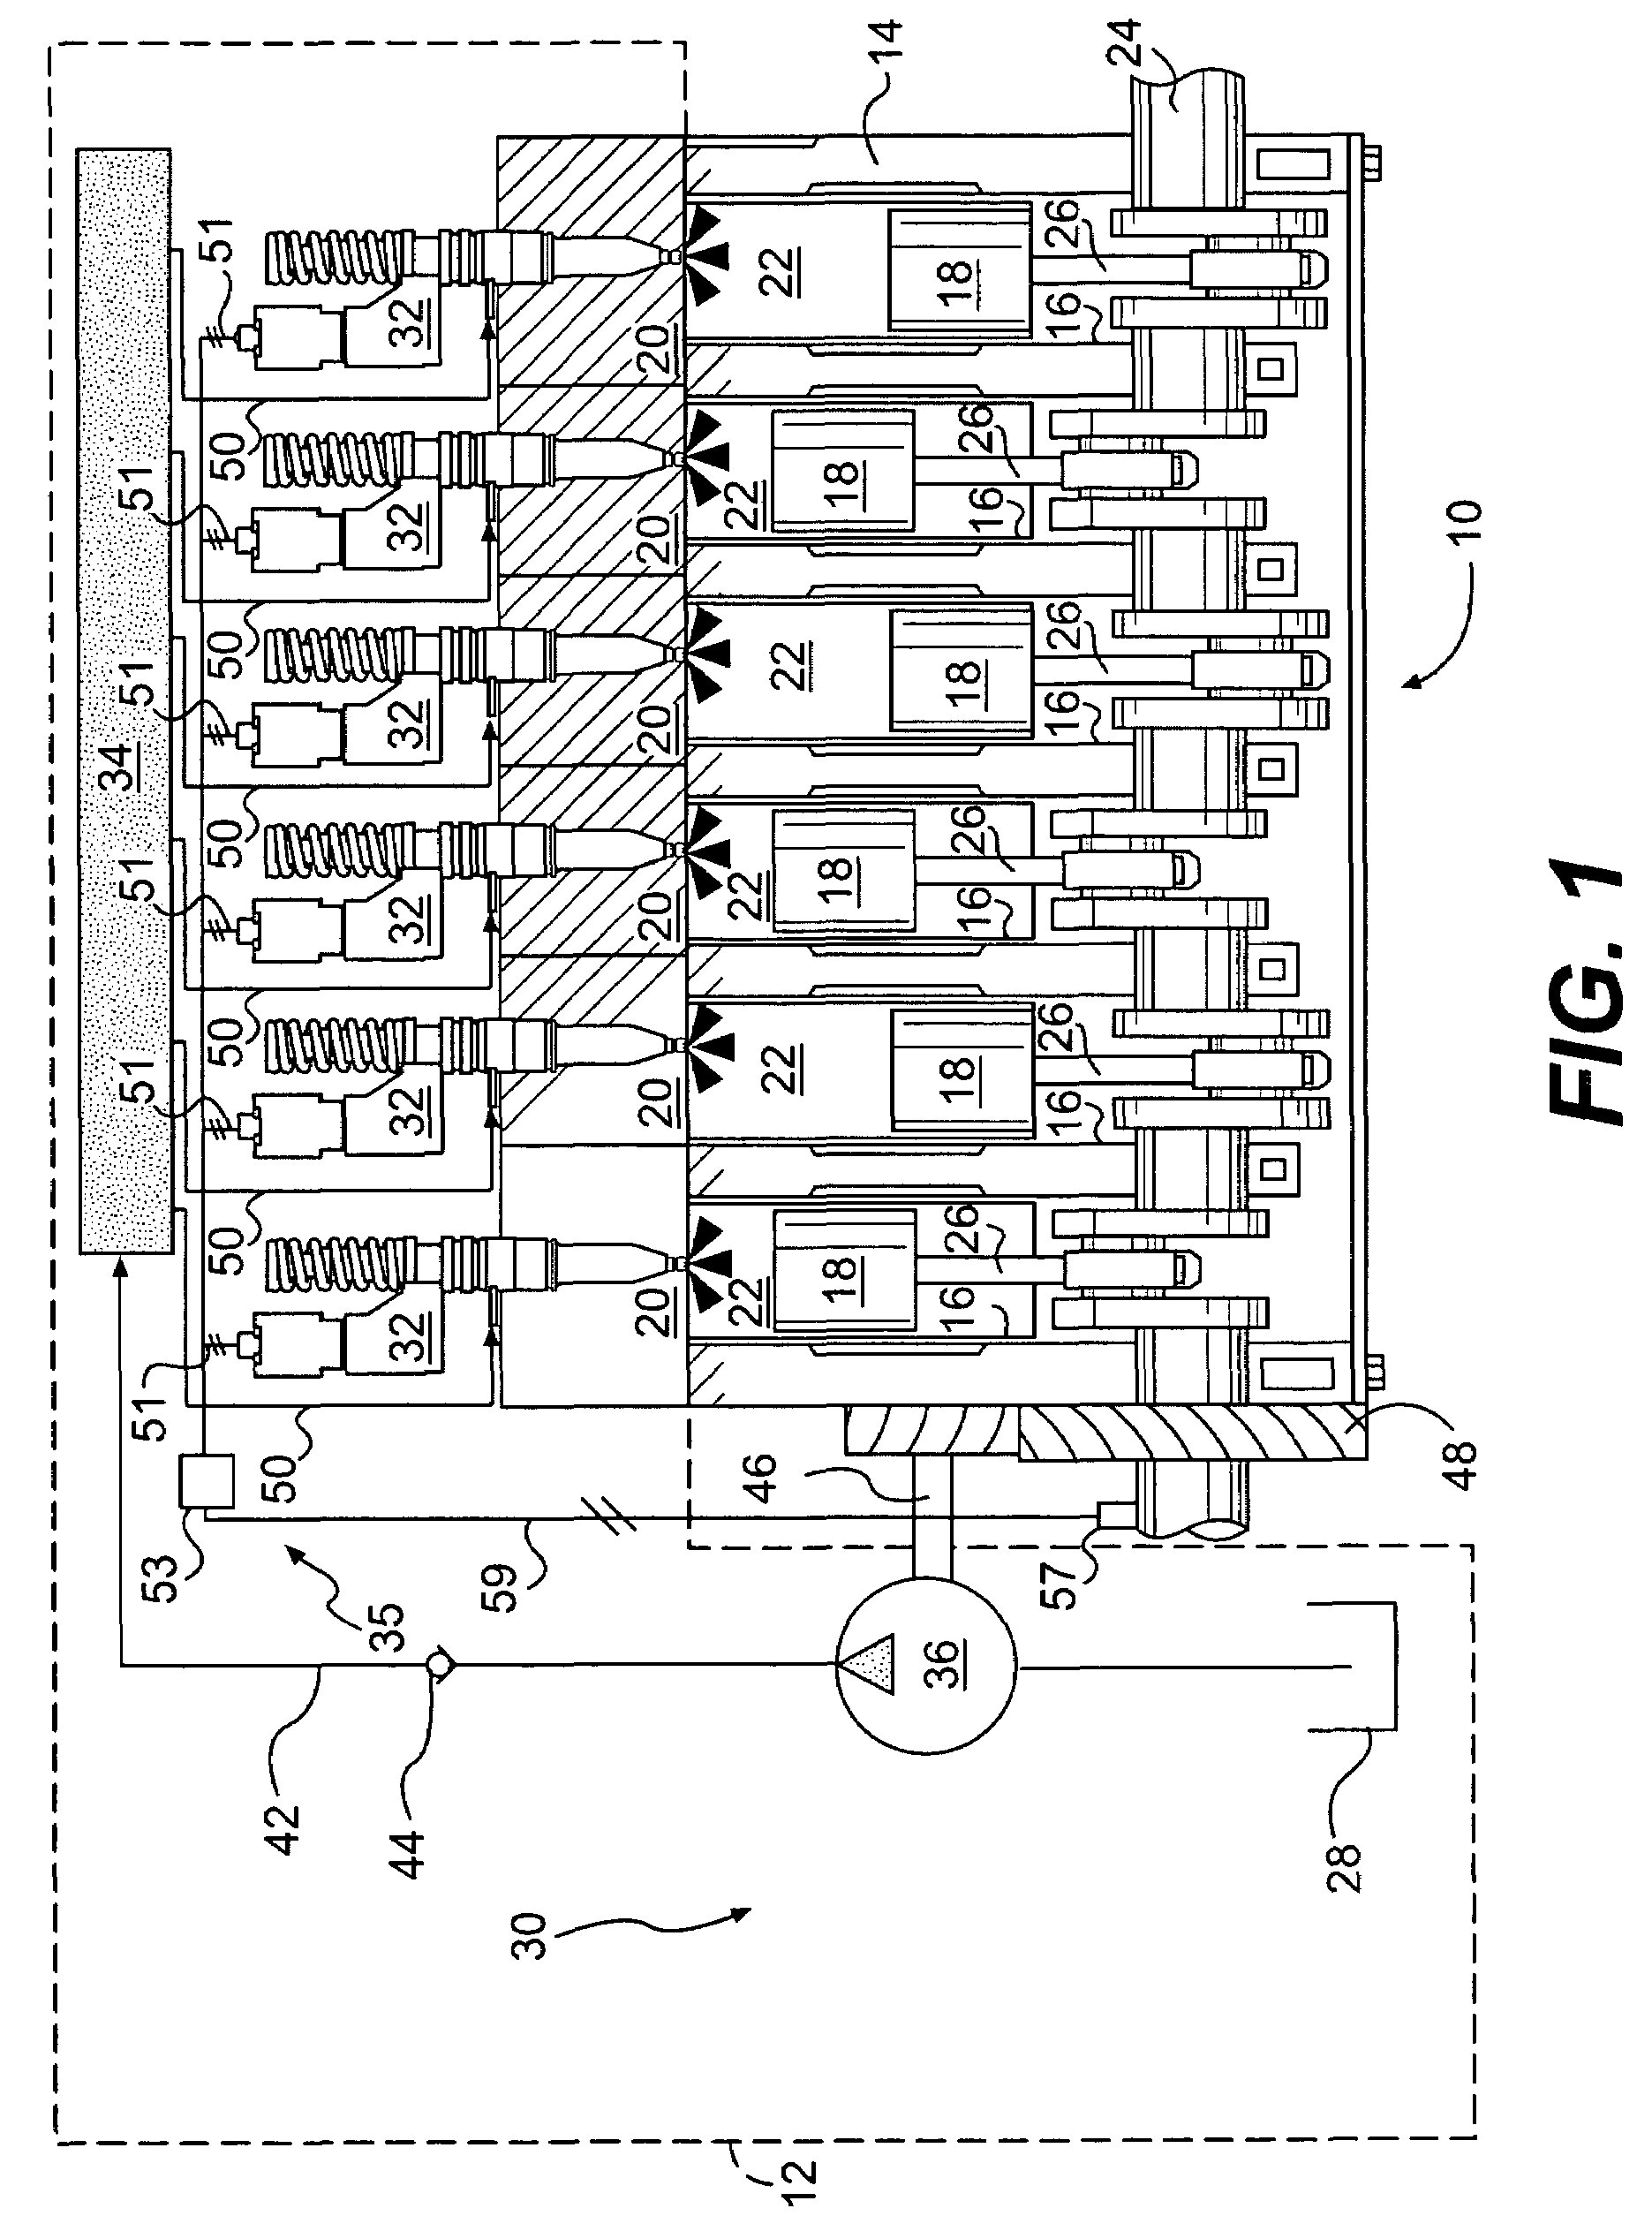 Parasitic load control system for exhaust temperature control